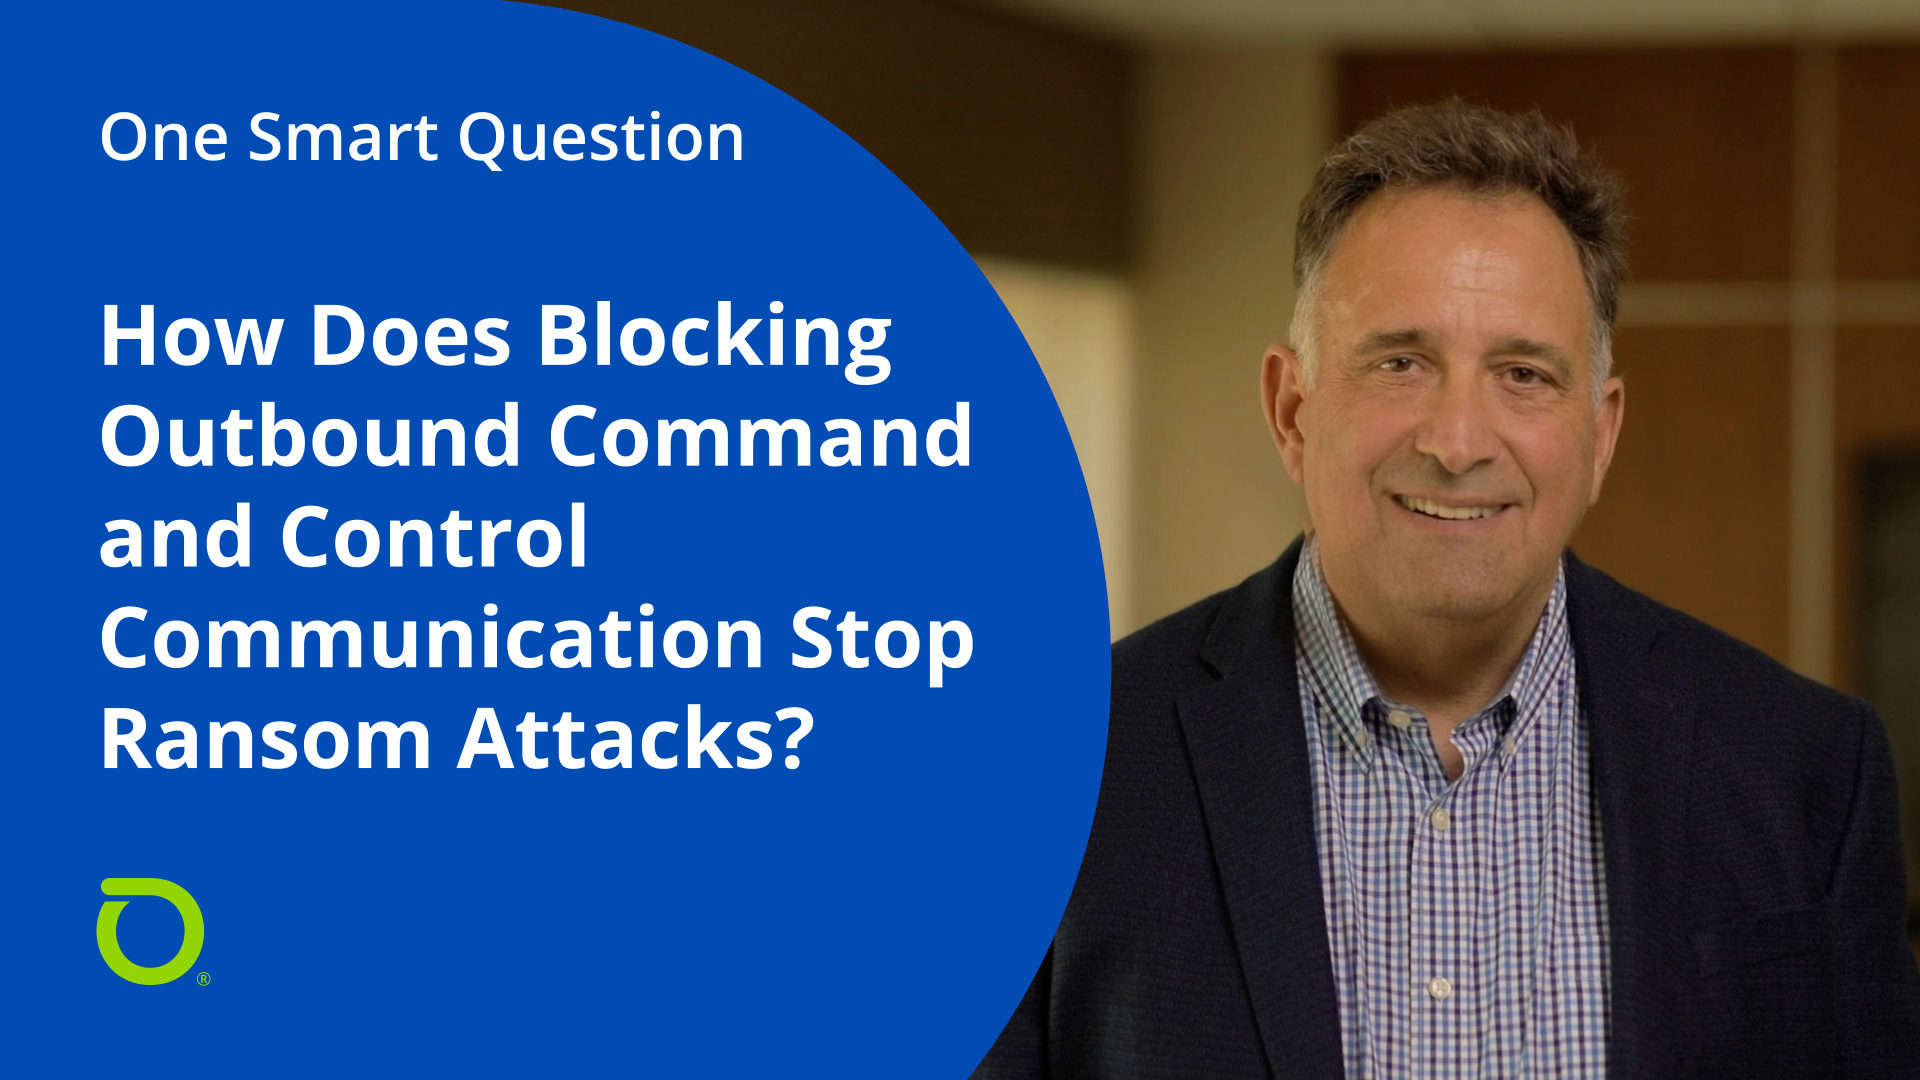 One Smart Question: Stop Ransom Attacks by Blocking Outbound Command & Control Communications